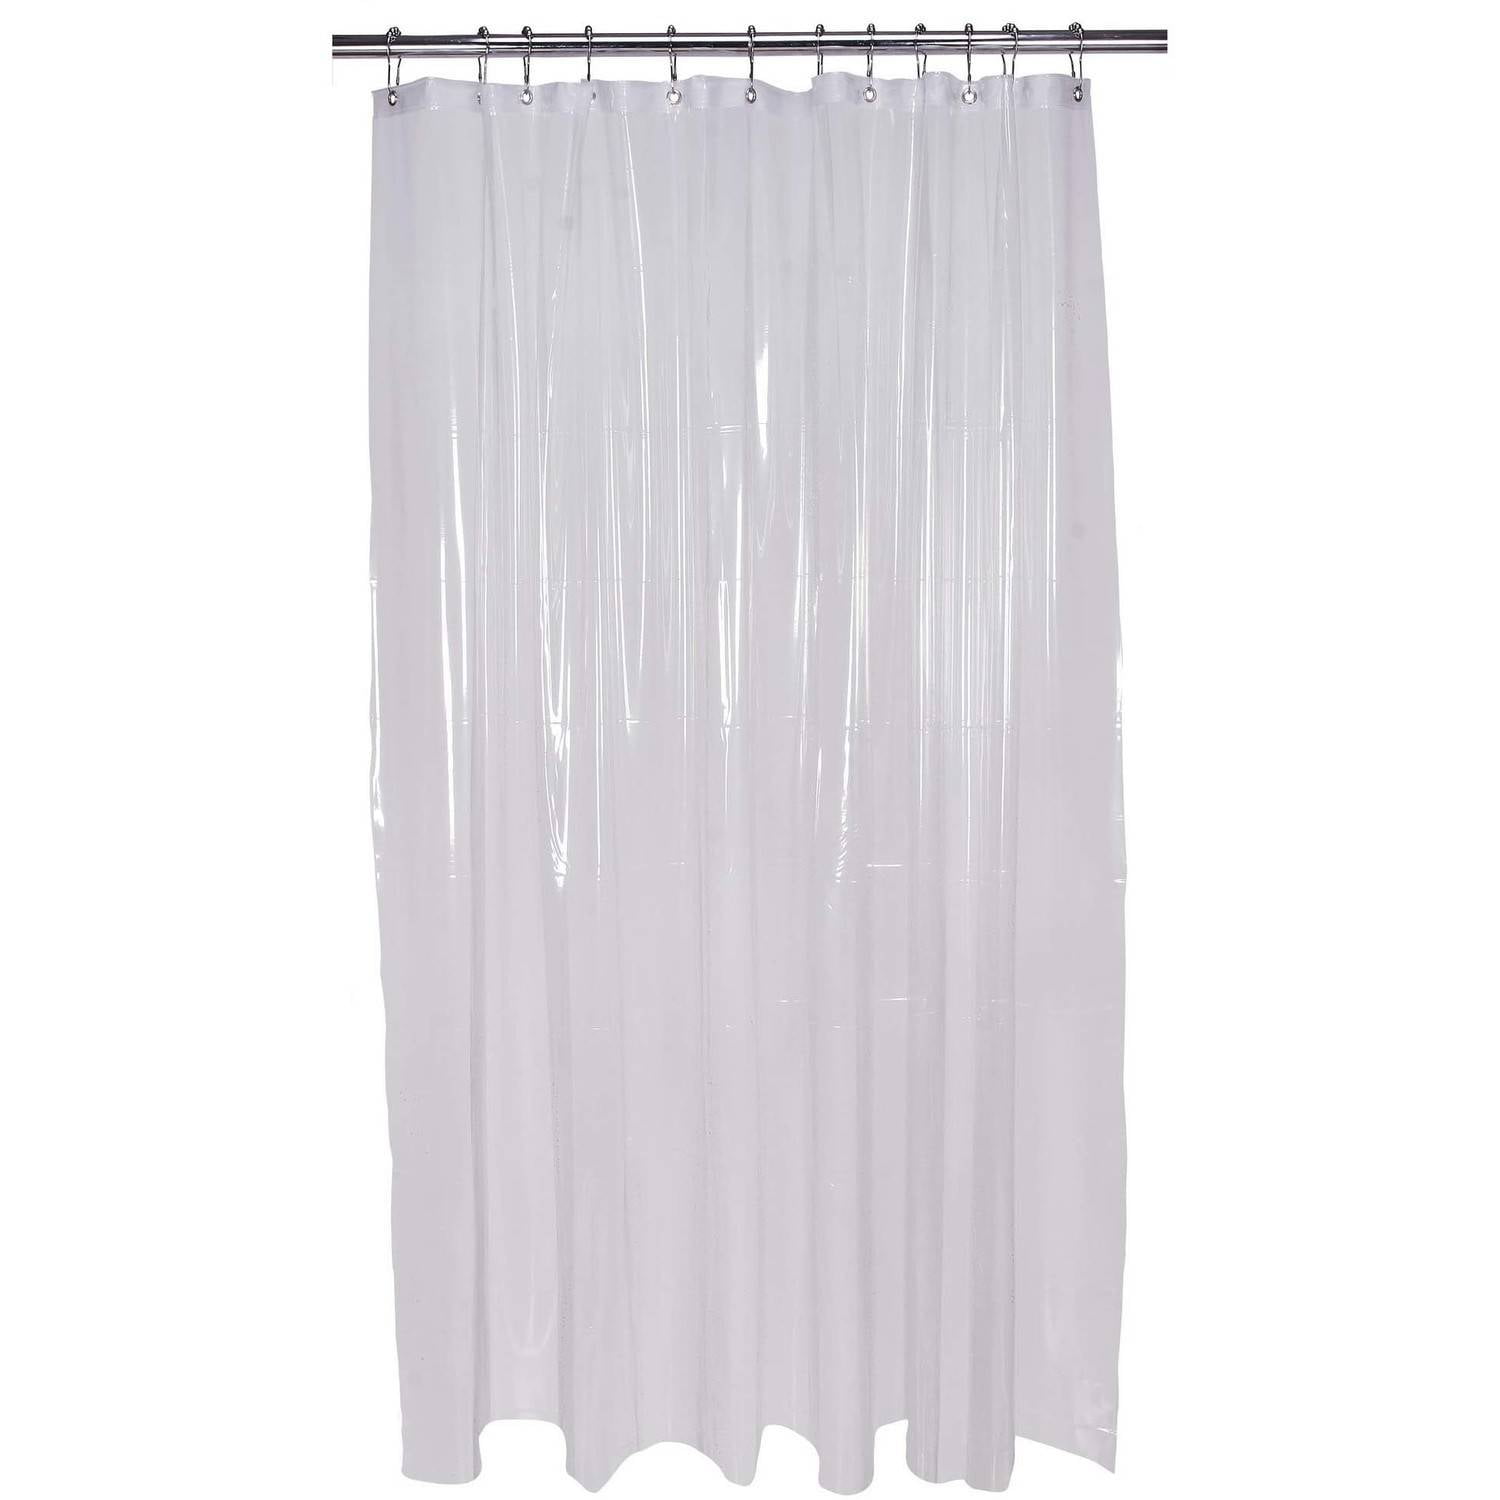 Bath Bliss Extra Long Shower Curtain Liner In Clear 72 X 84